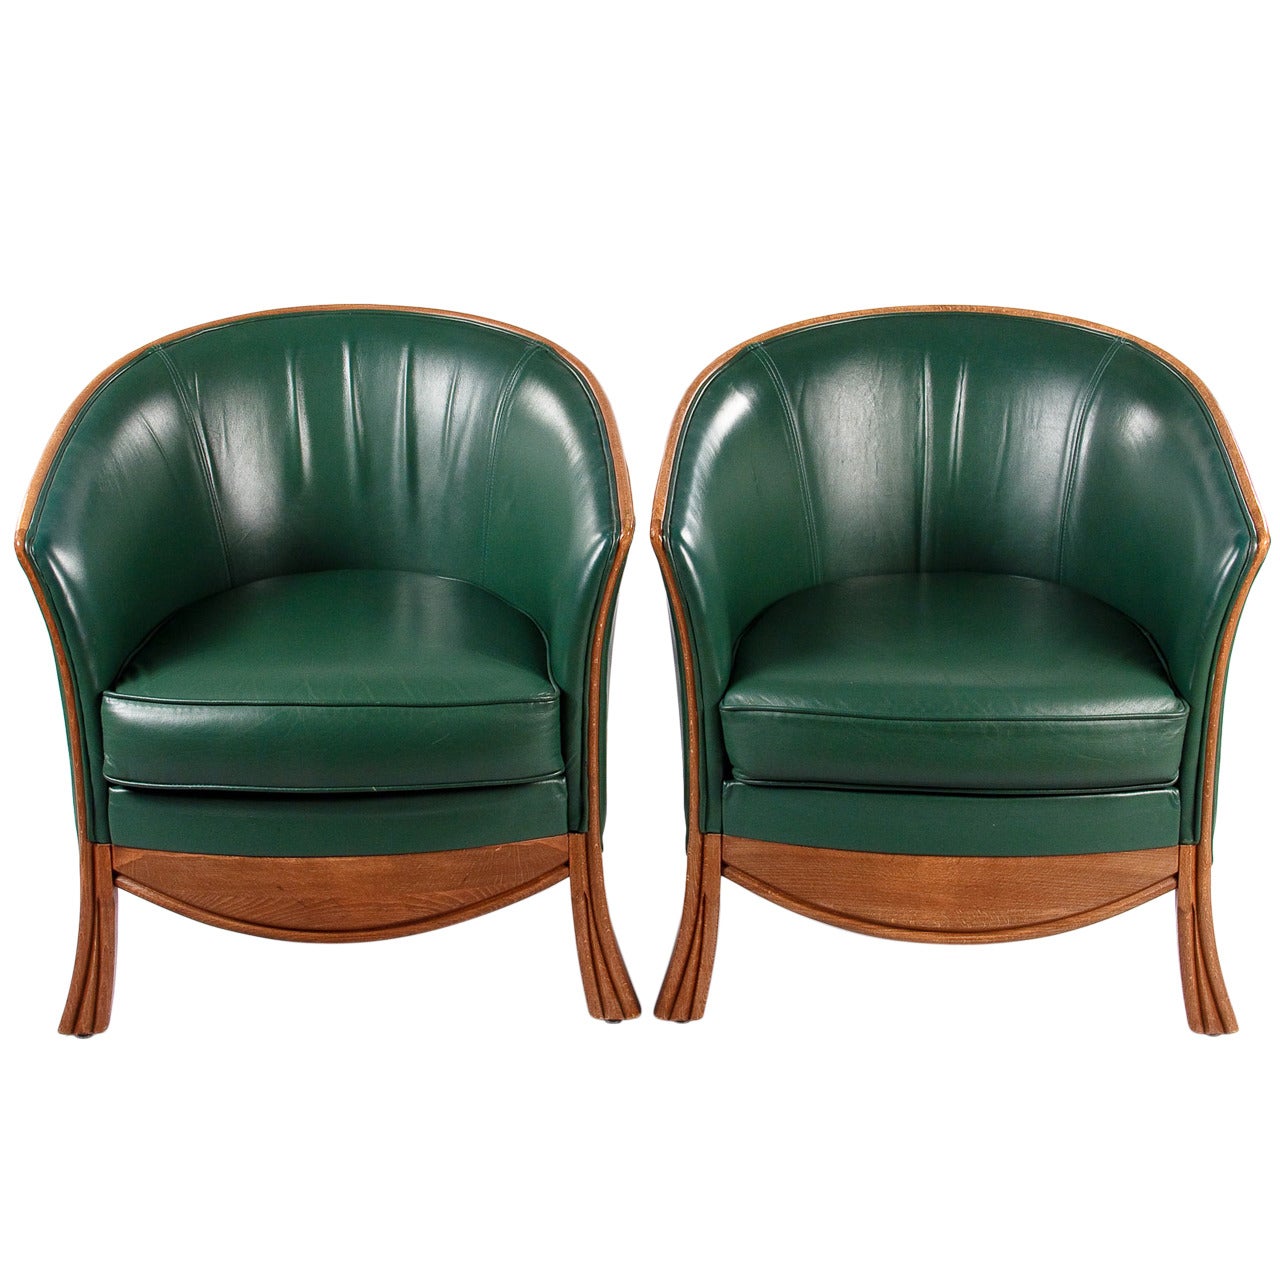 Pair of 1950s Leather Armchairs by Rosello of Paris